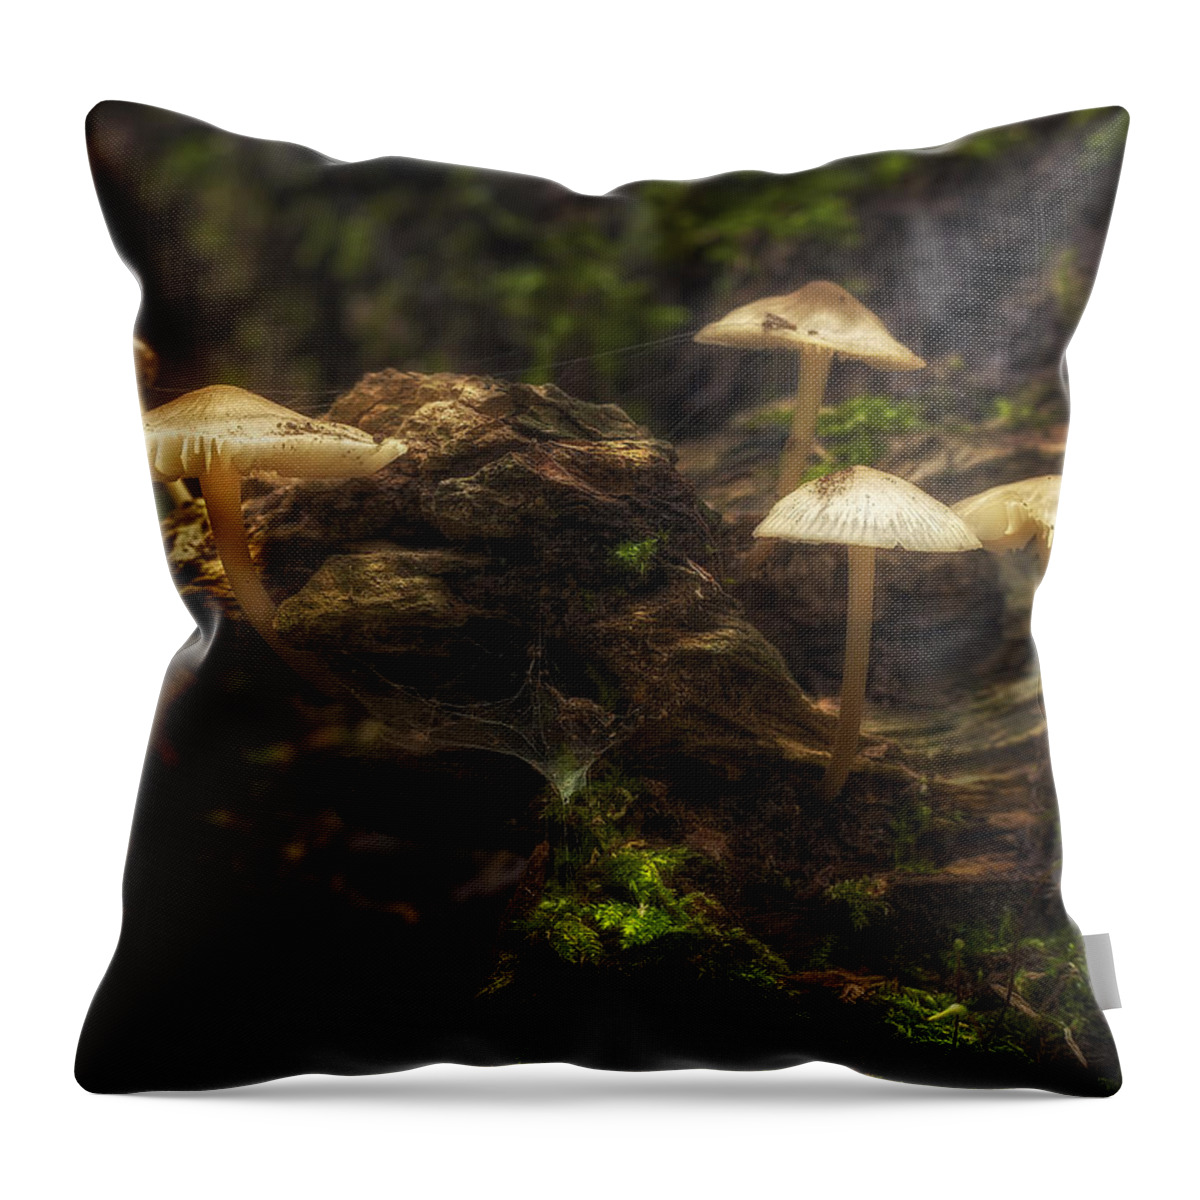 Mushrooms Throw Pillow featuring the photograph Enchanted Forest by Scott Norris